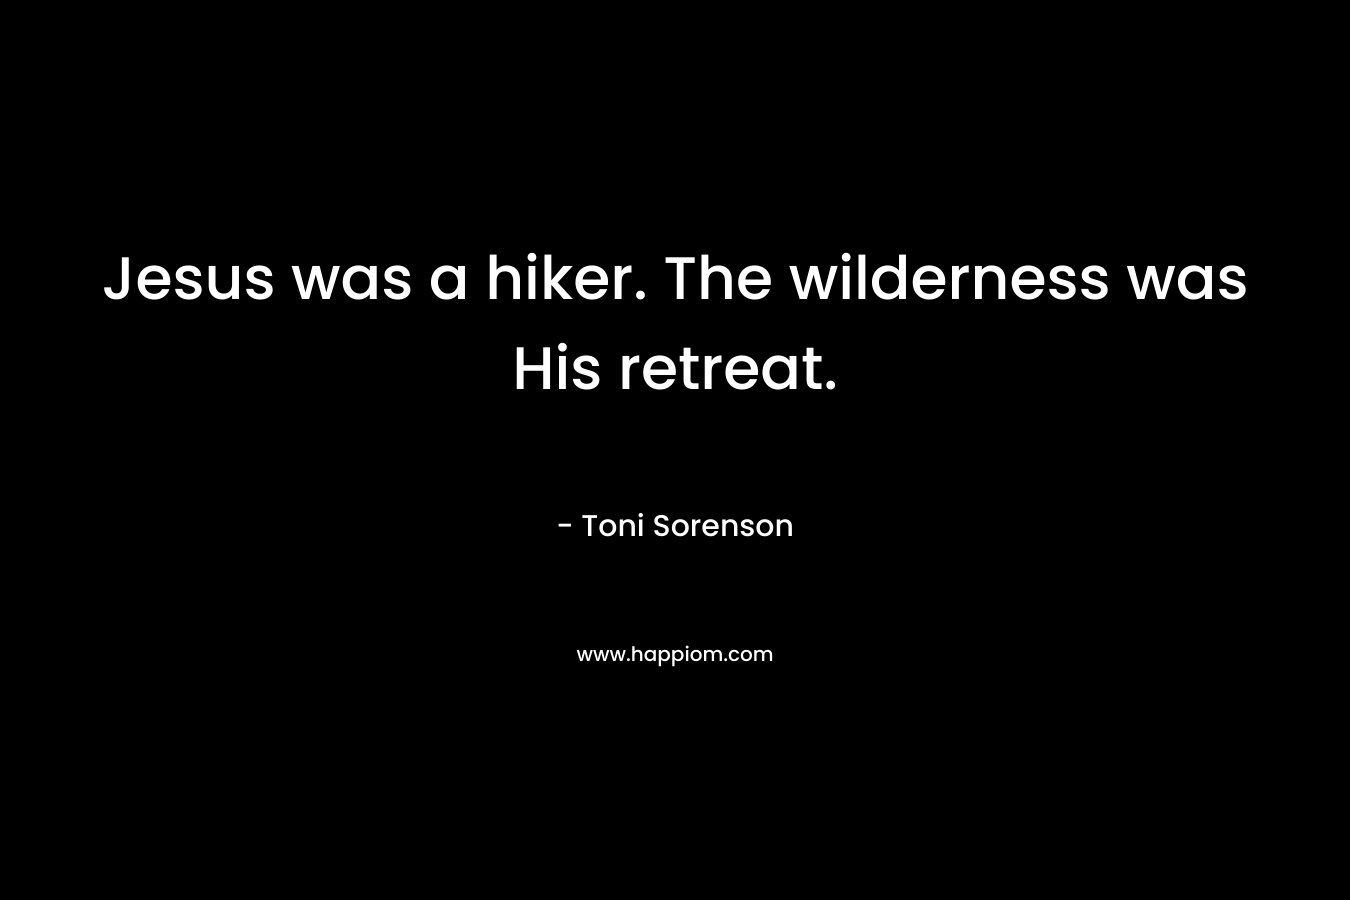 Jesus was a hiker. The wilderness was His retreat.